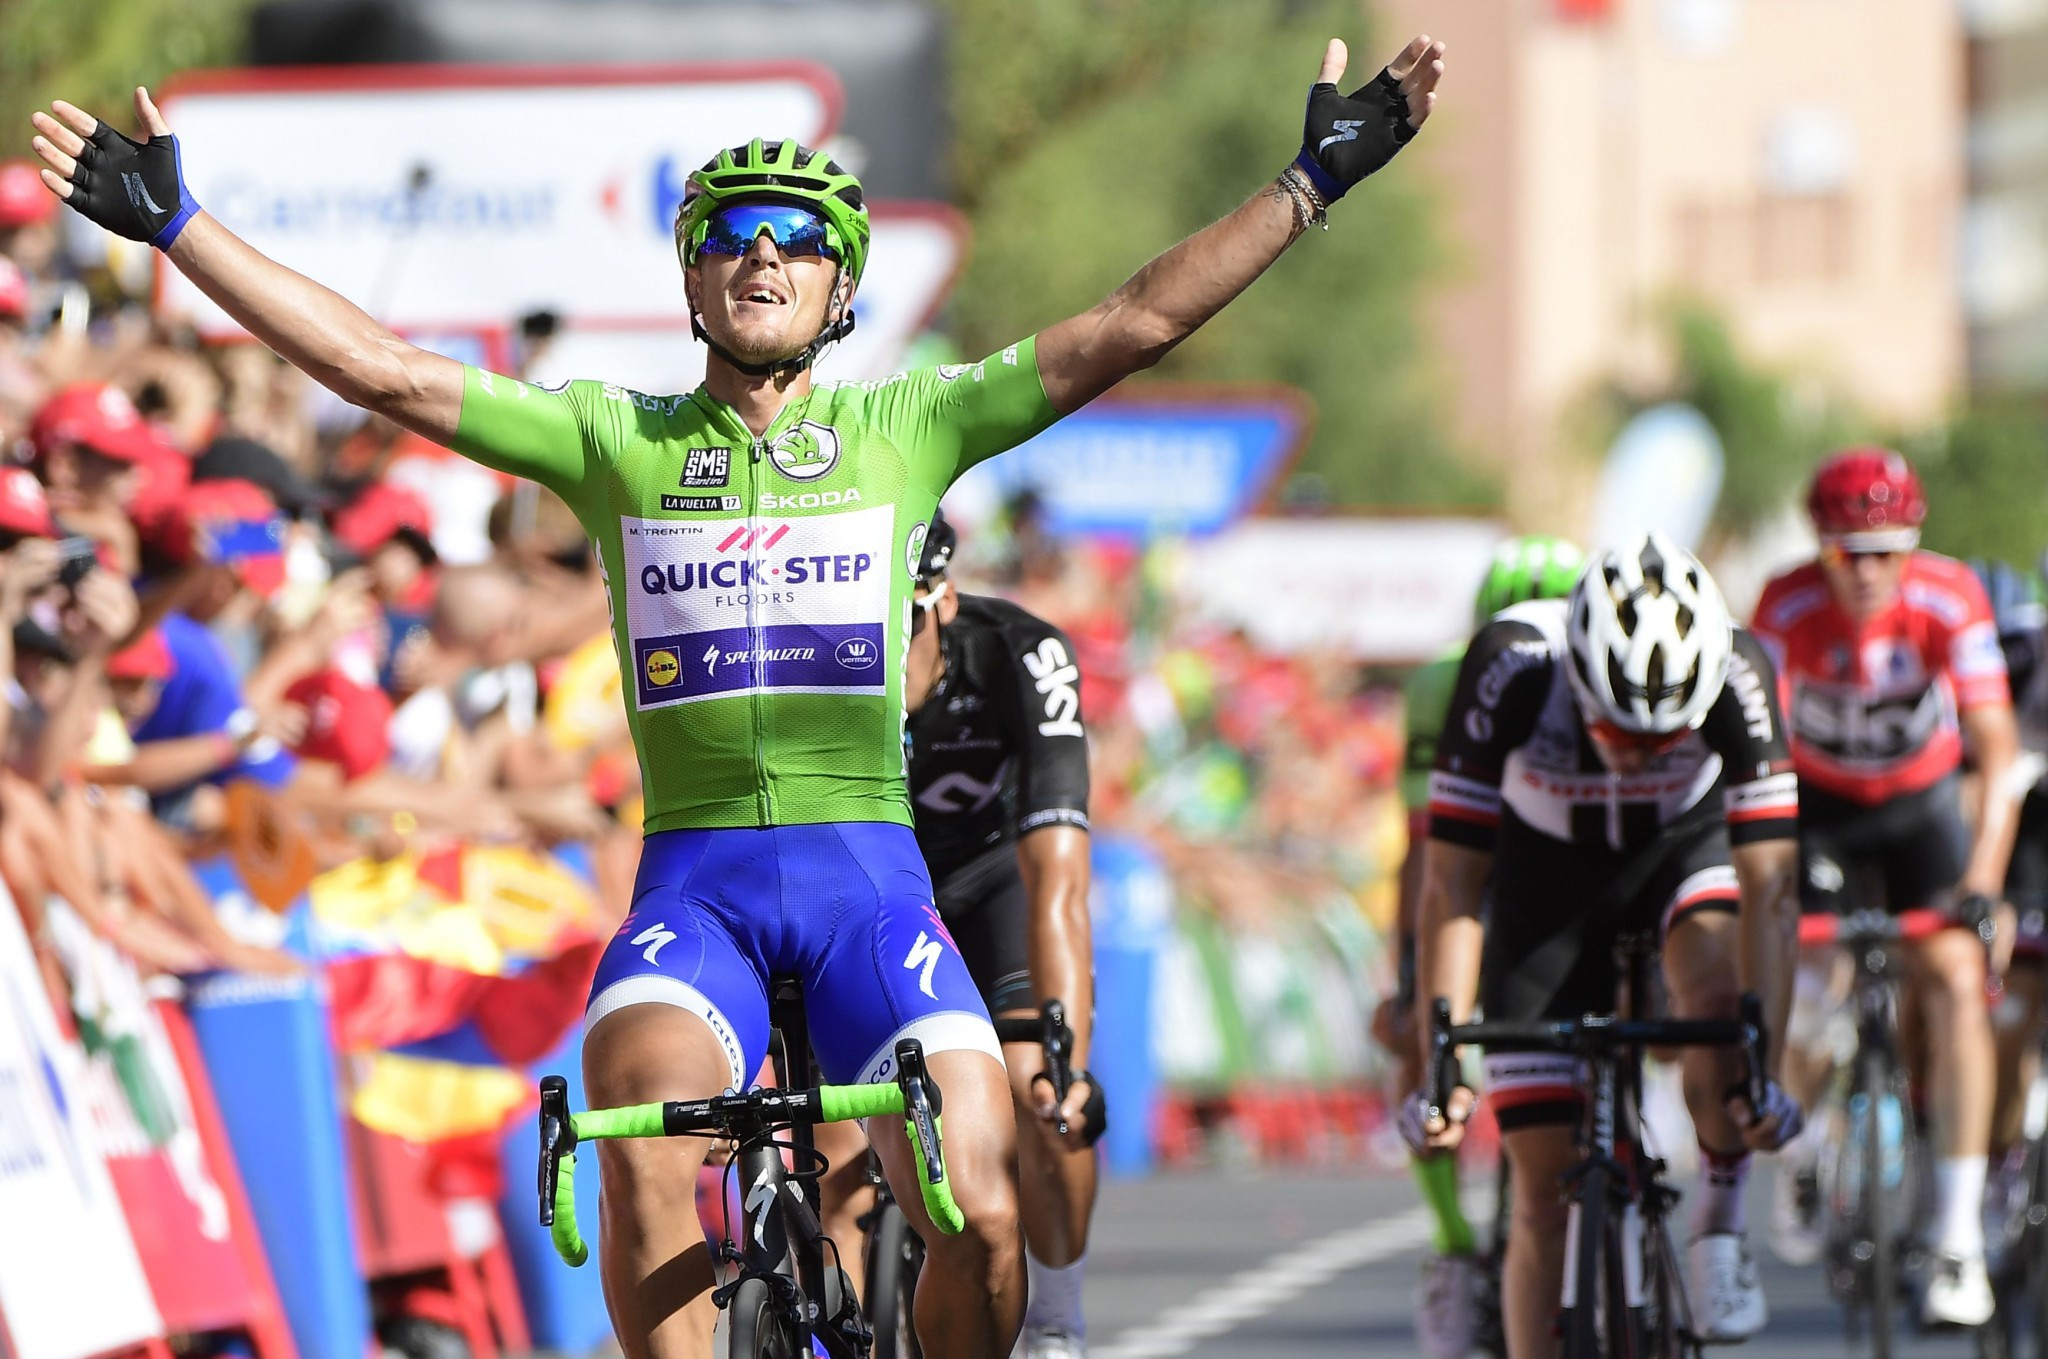 Italy’s Matteo Trentin won stage 13 of the Vuelta a Espana today ©Getty Images